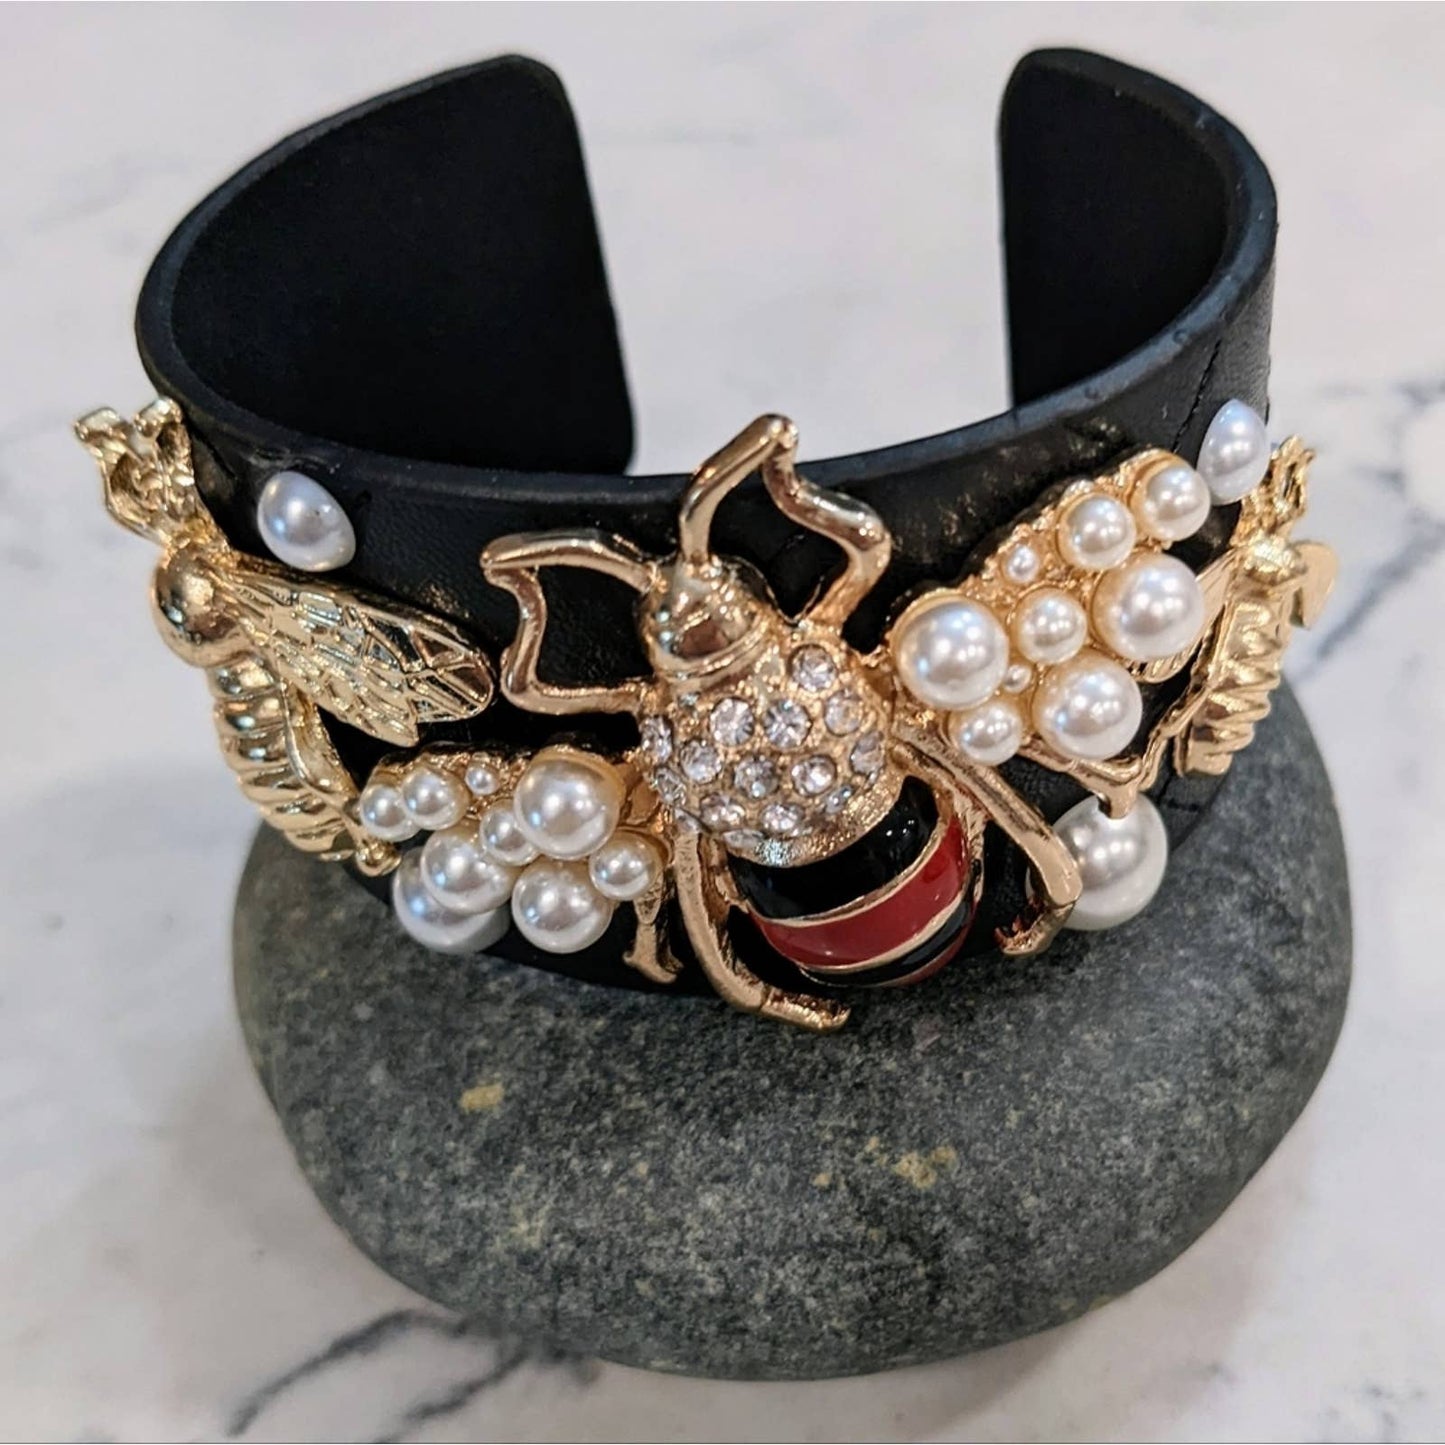 Quilted Bracelet Style Cuff Featuring Gold Tone Sparkle Bees